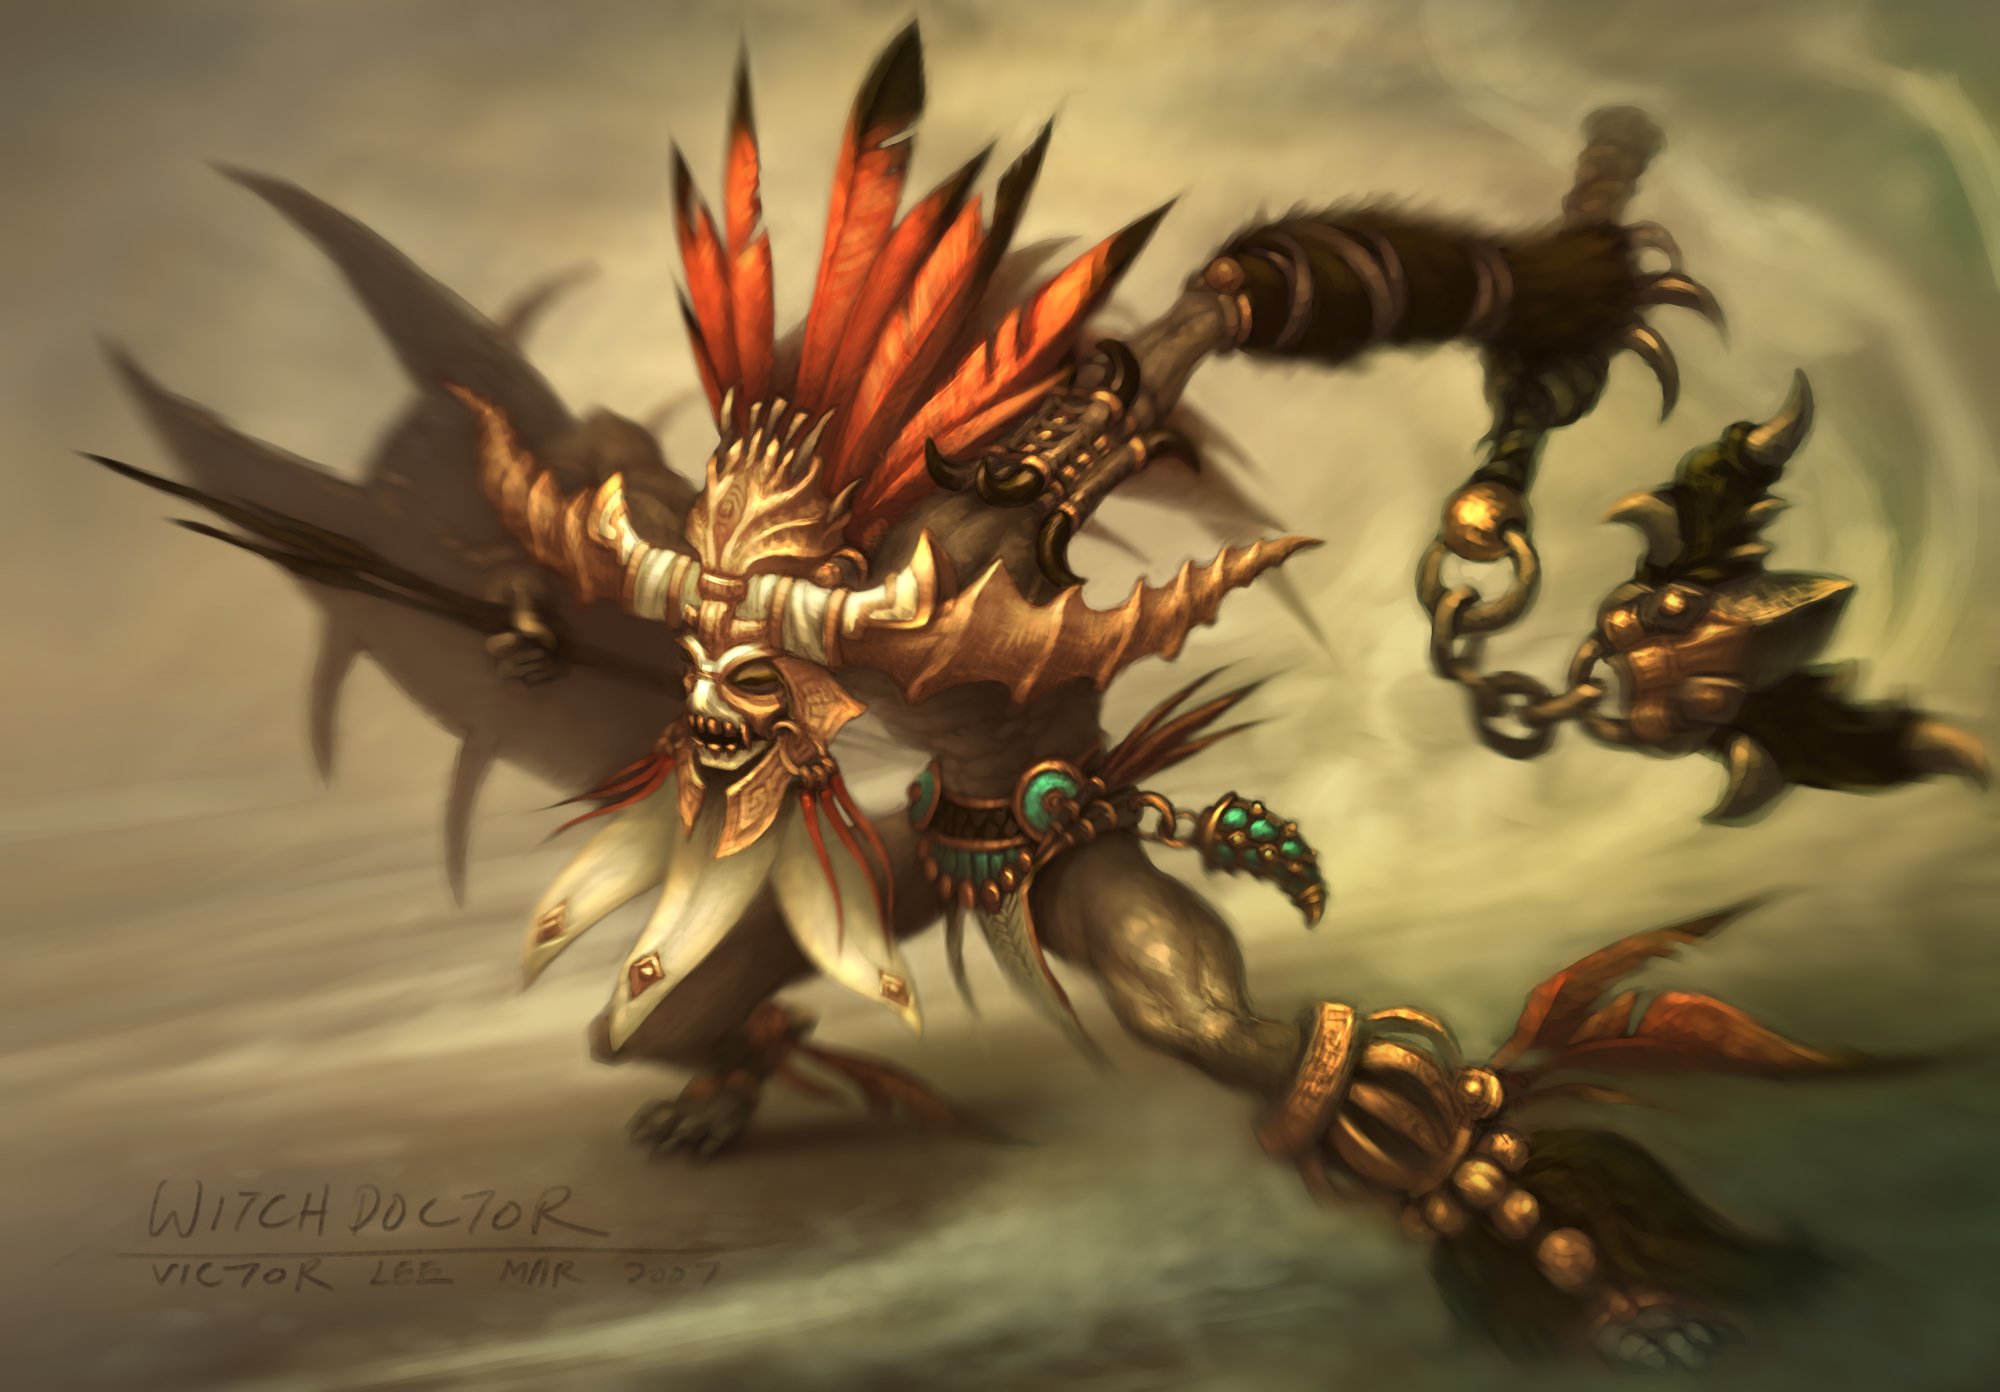 Witch Doctor Backgrounds, Compatible - PC, Mobile, Gadgets| 2000x1392 px